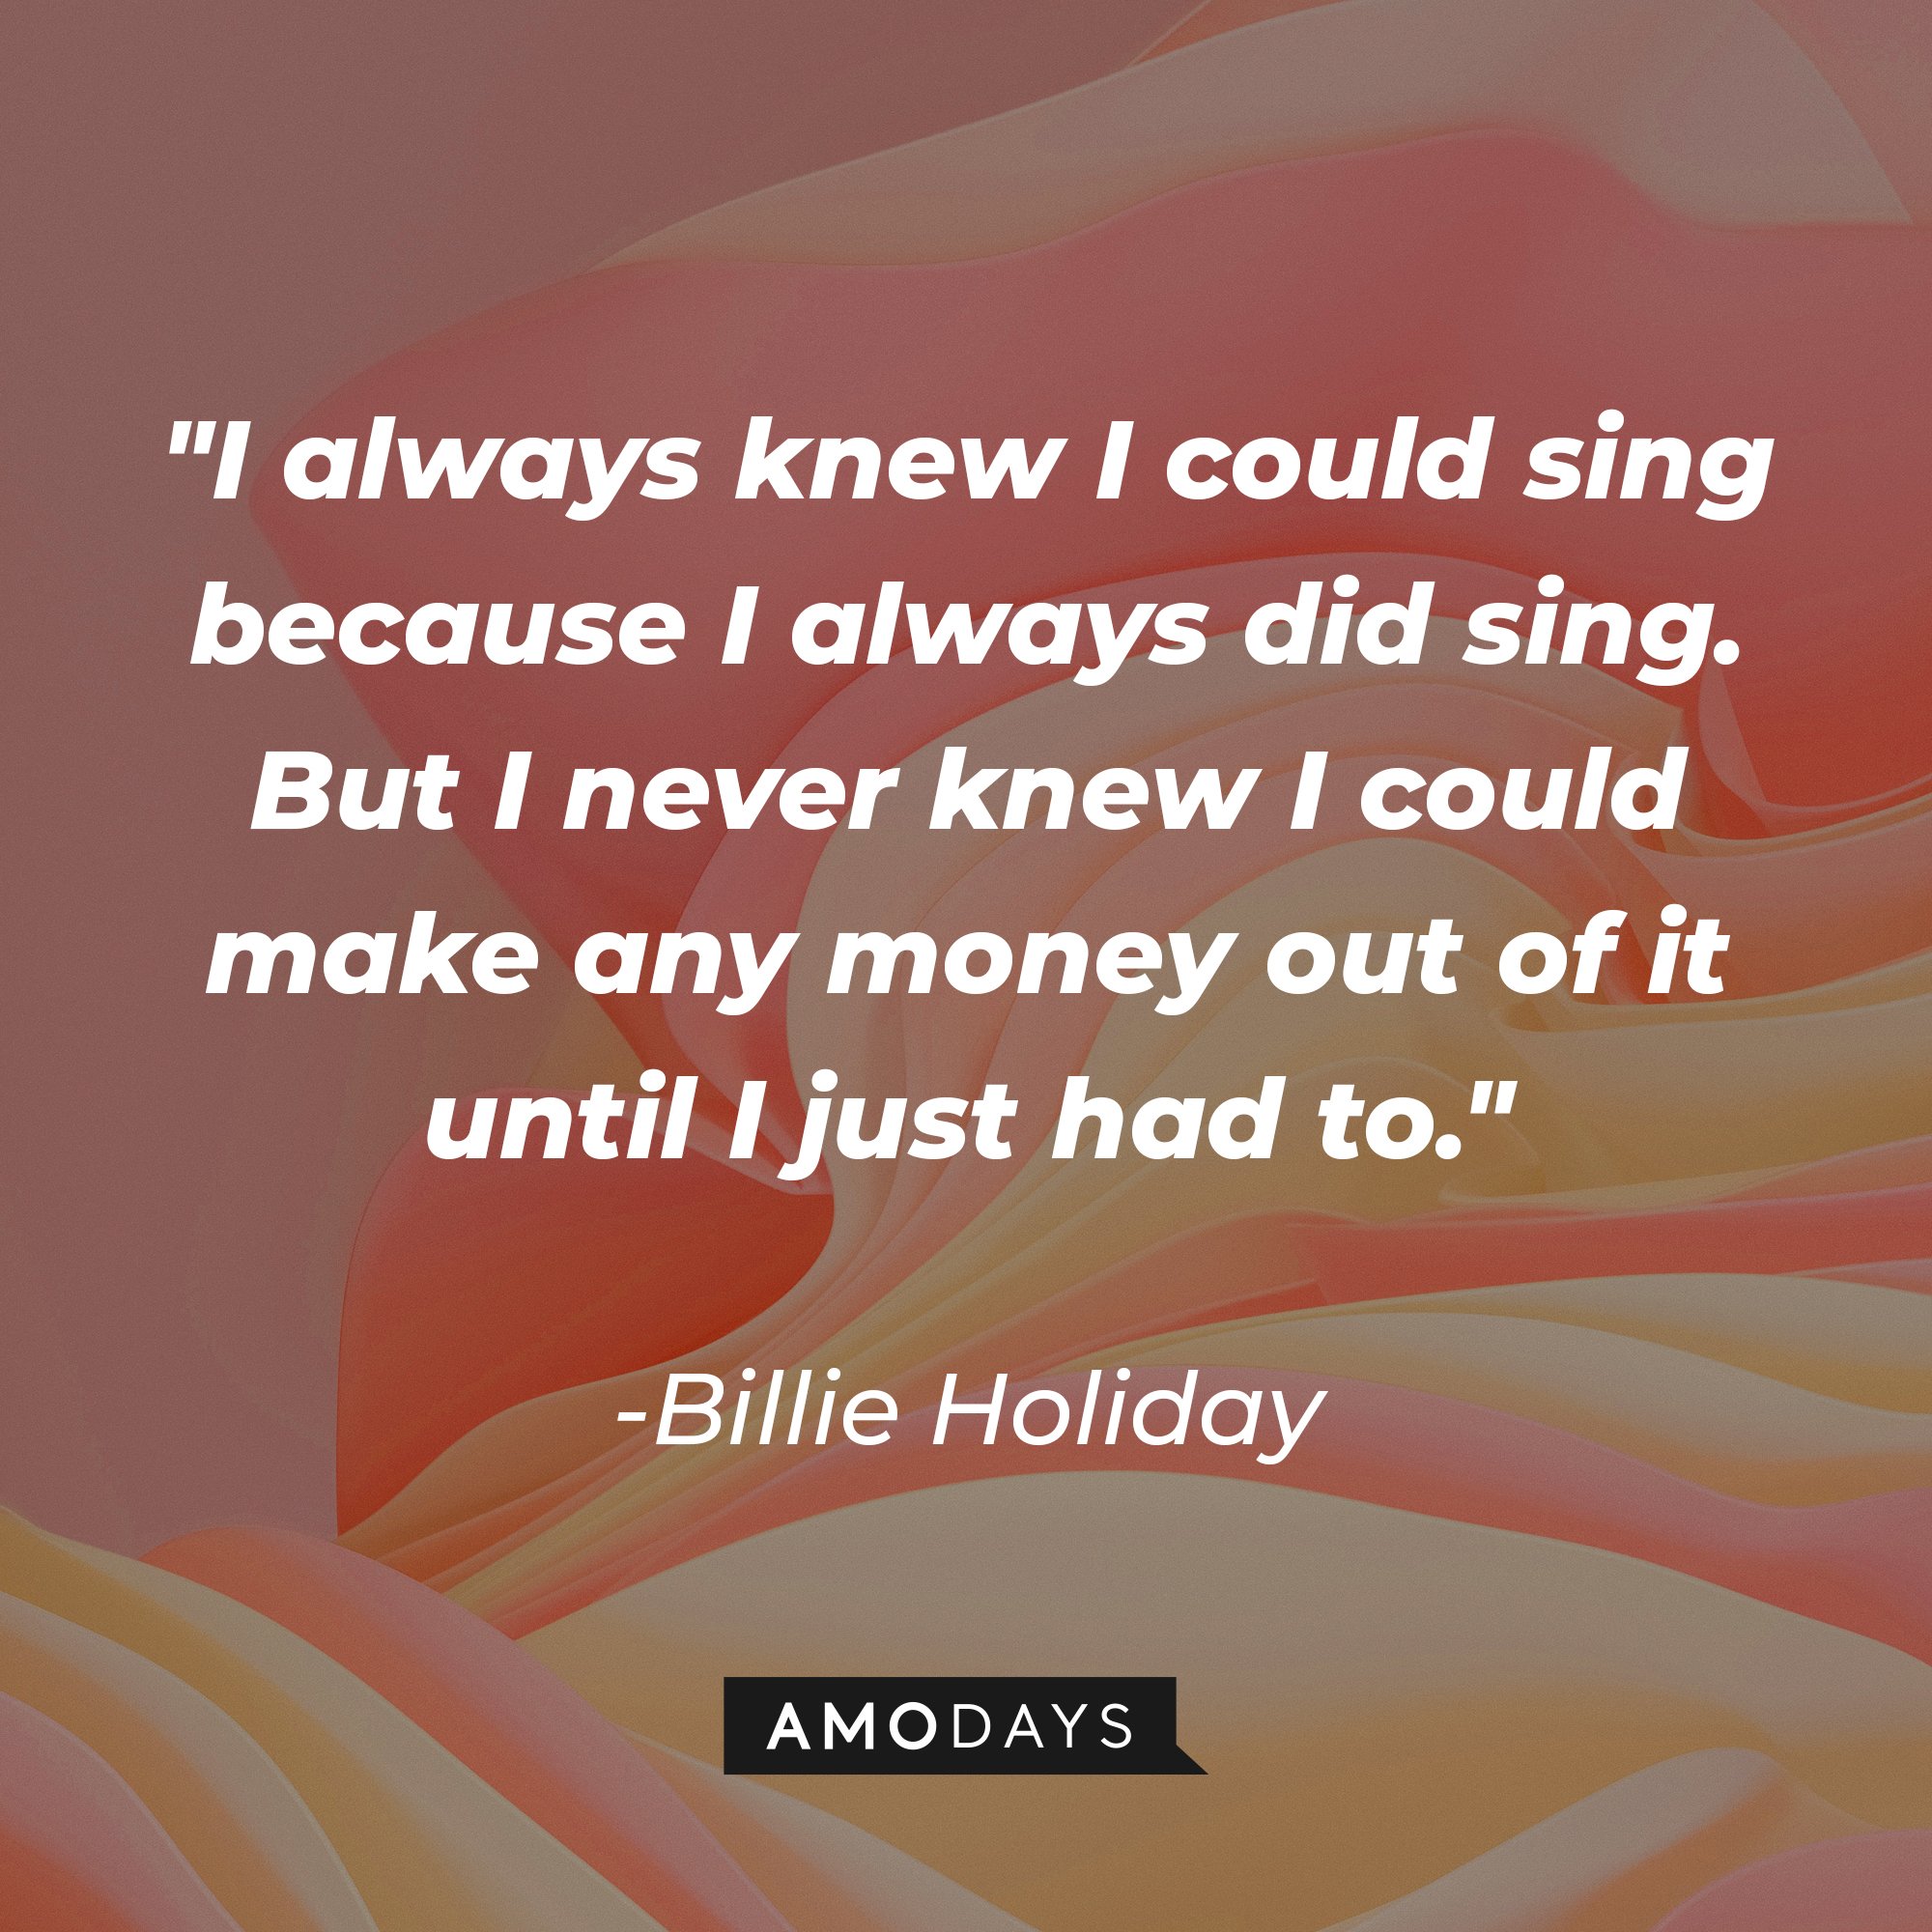 Billie Holiday's quote "I always knew I could sing because I always did sing. But I never knew I could make any money out of it until I just had to." | Source: Unsplash.com